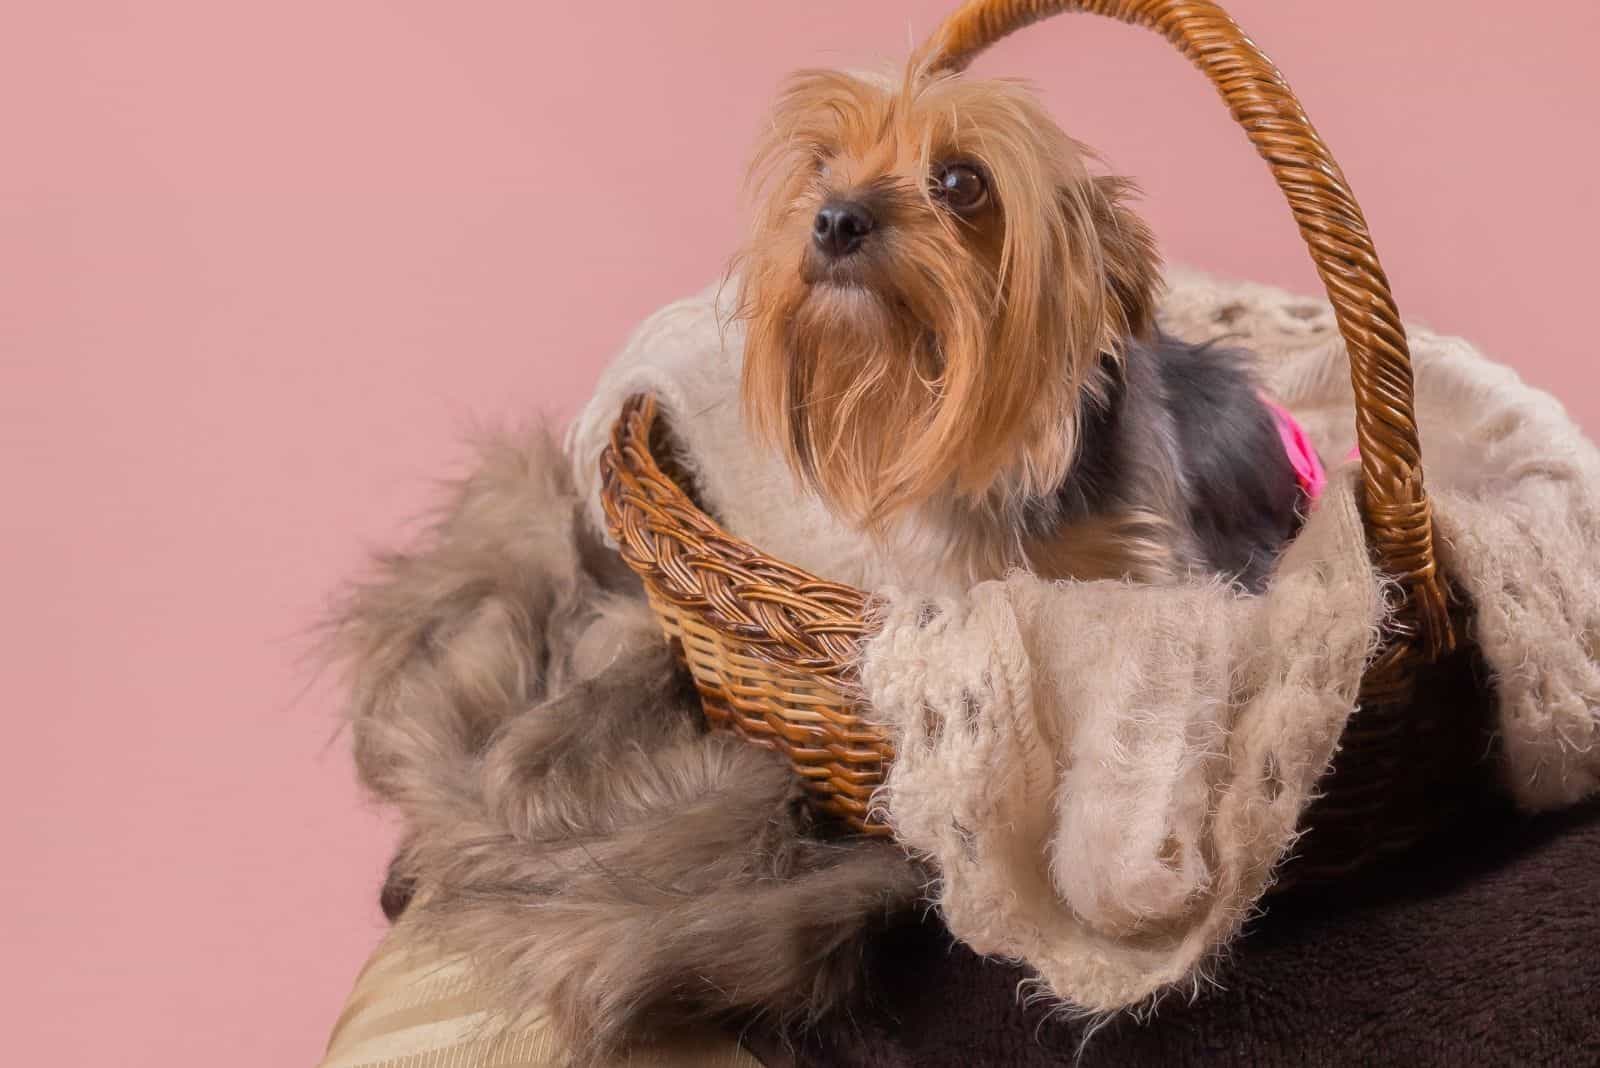 pregnant yorkshire pet placed inside a basket with knitted cloth on pink background